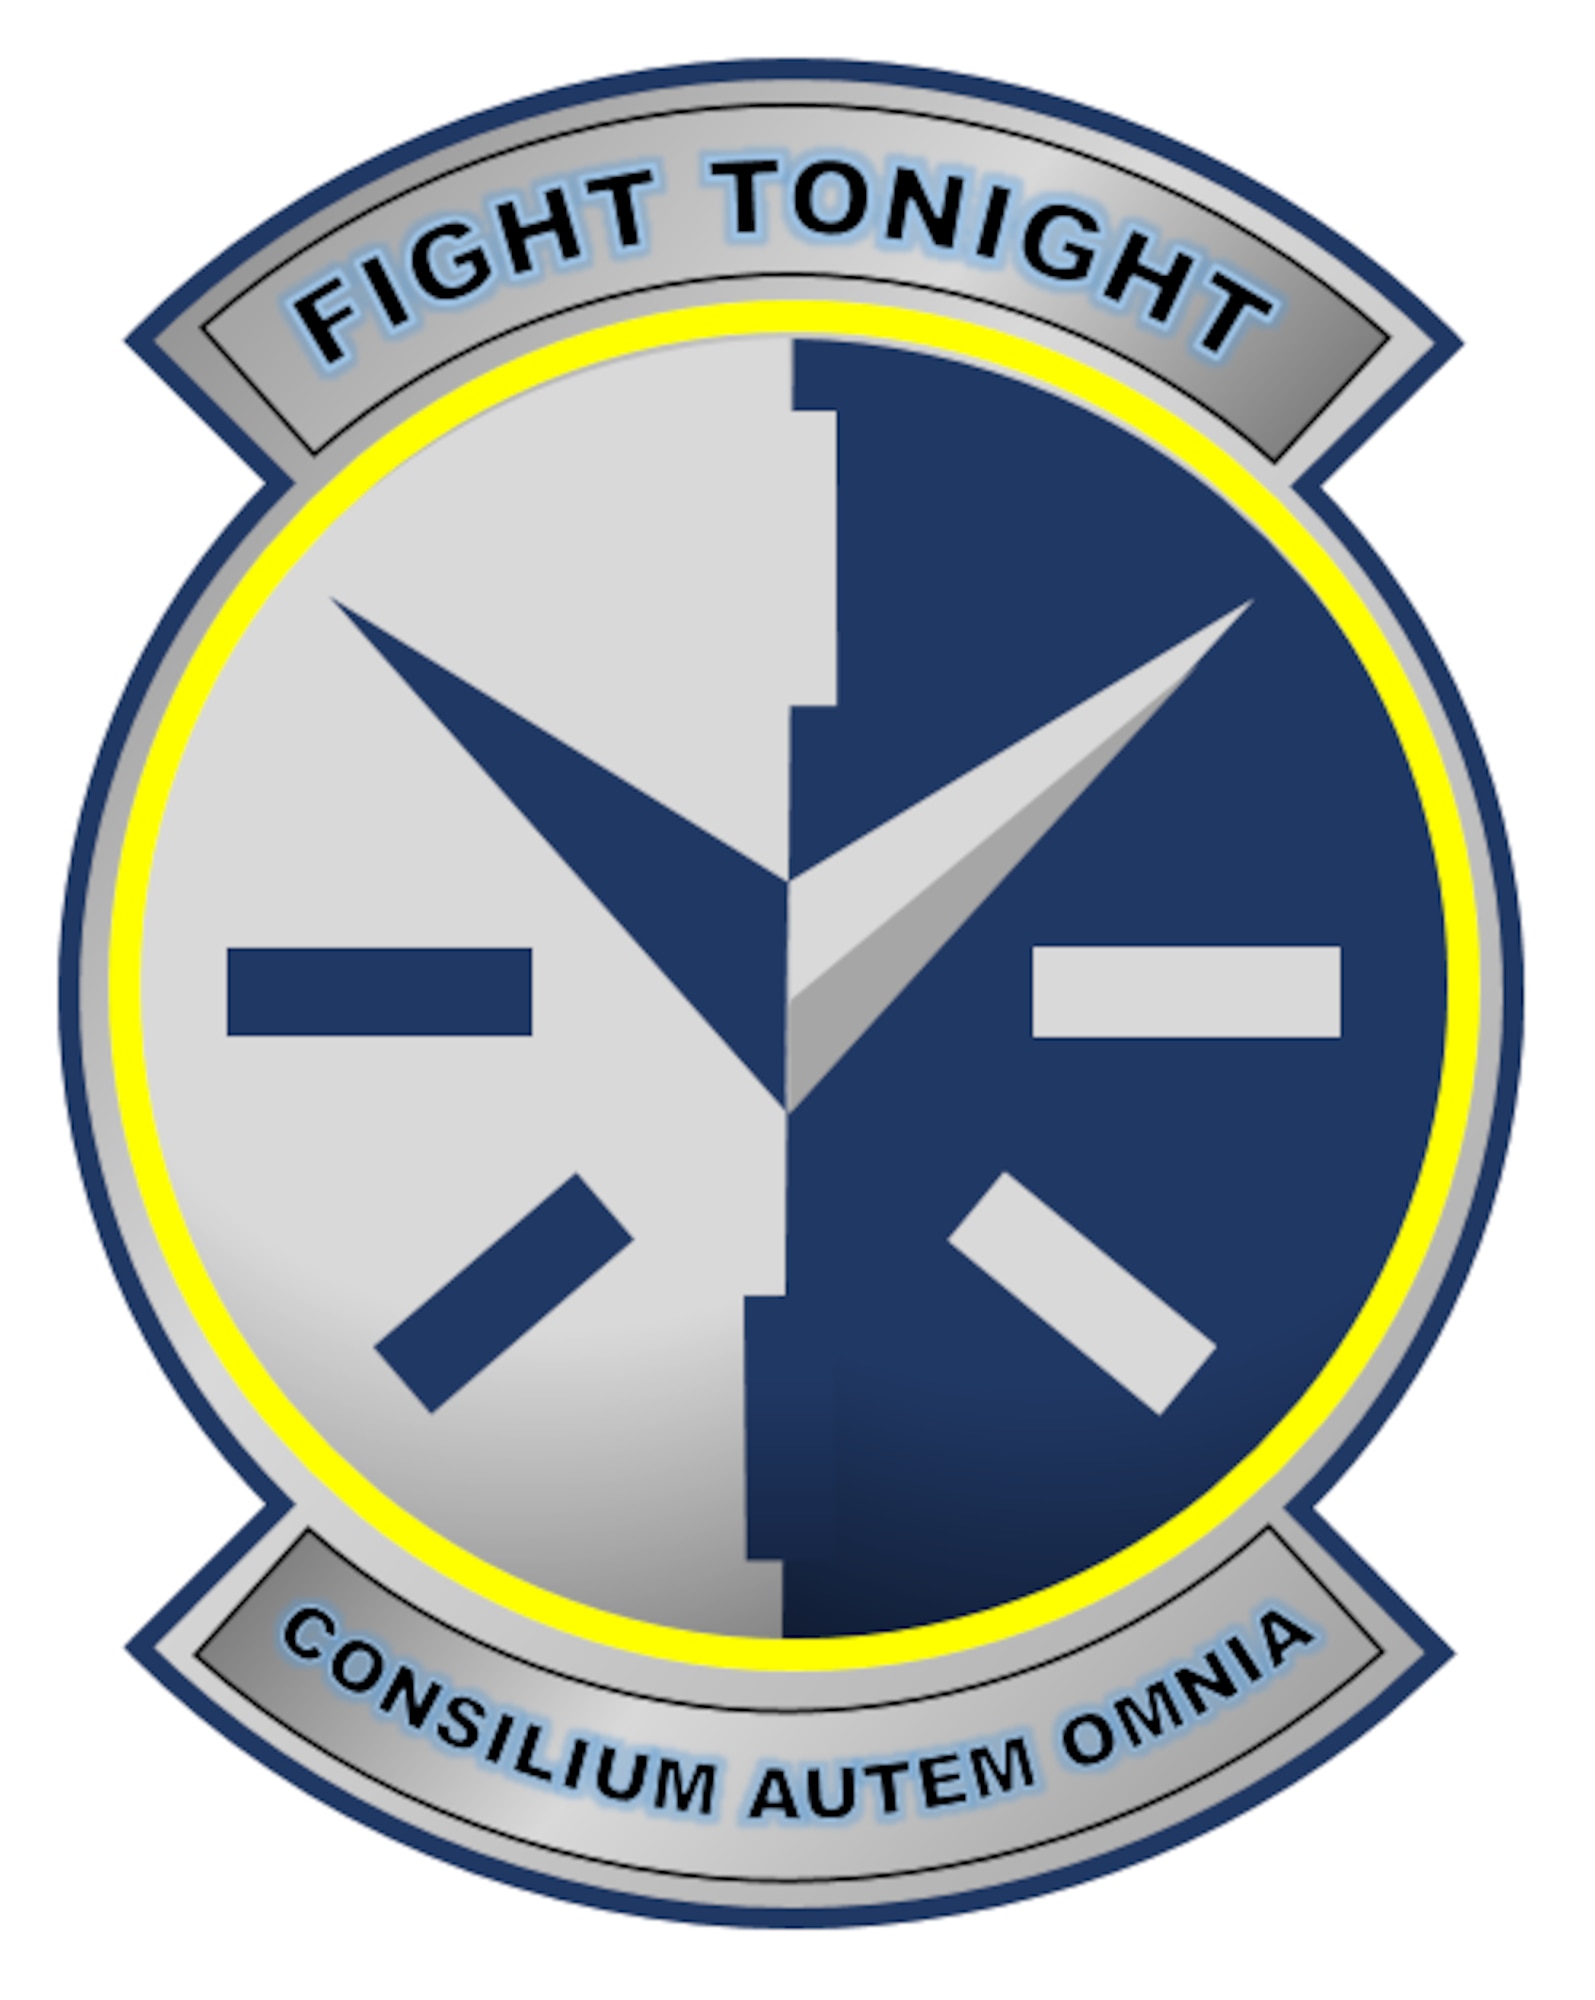 Another capability topic, Fight Tonight, was also approved at the 2021 WARTECH Summit to begin program execution in Fiscal Year 2022. Fight Tonight’s motto of “plan for everything,” as seen in the insignia, seeks rapid planning capability in the midst of dynamic, adversarial conflict. (Image courtesy of Dr. Jeffrey Hudak)